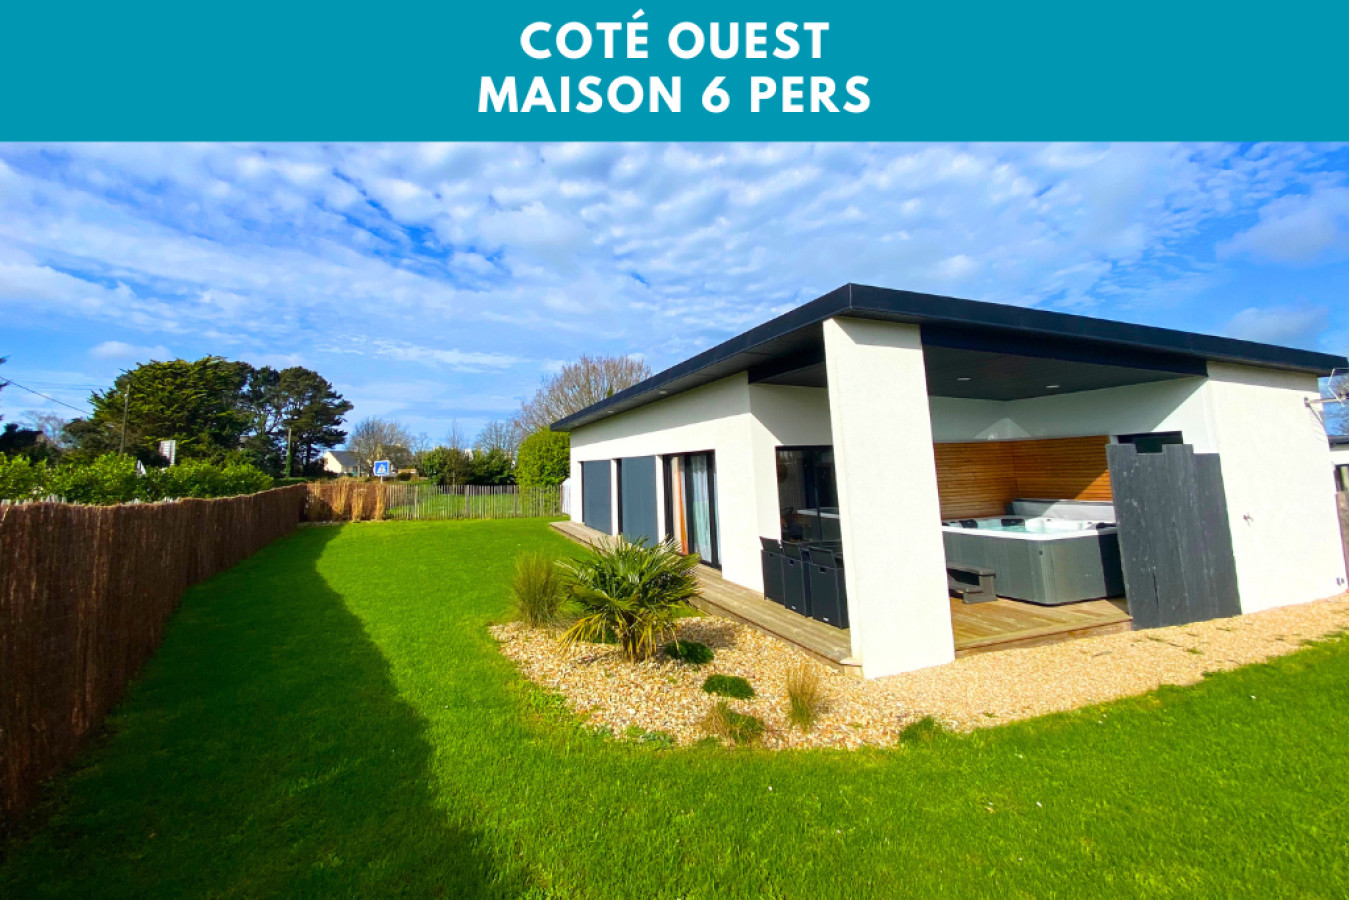 Property Image 1 - Carantec Cote Ouest 6 pers with private jacuzzi and garden